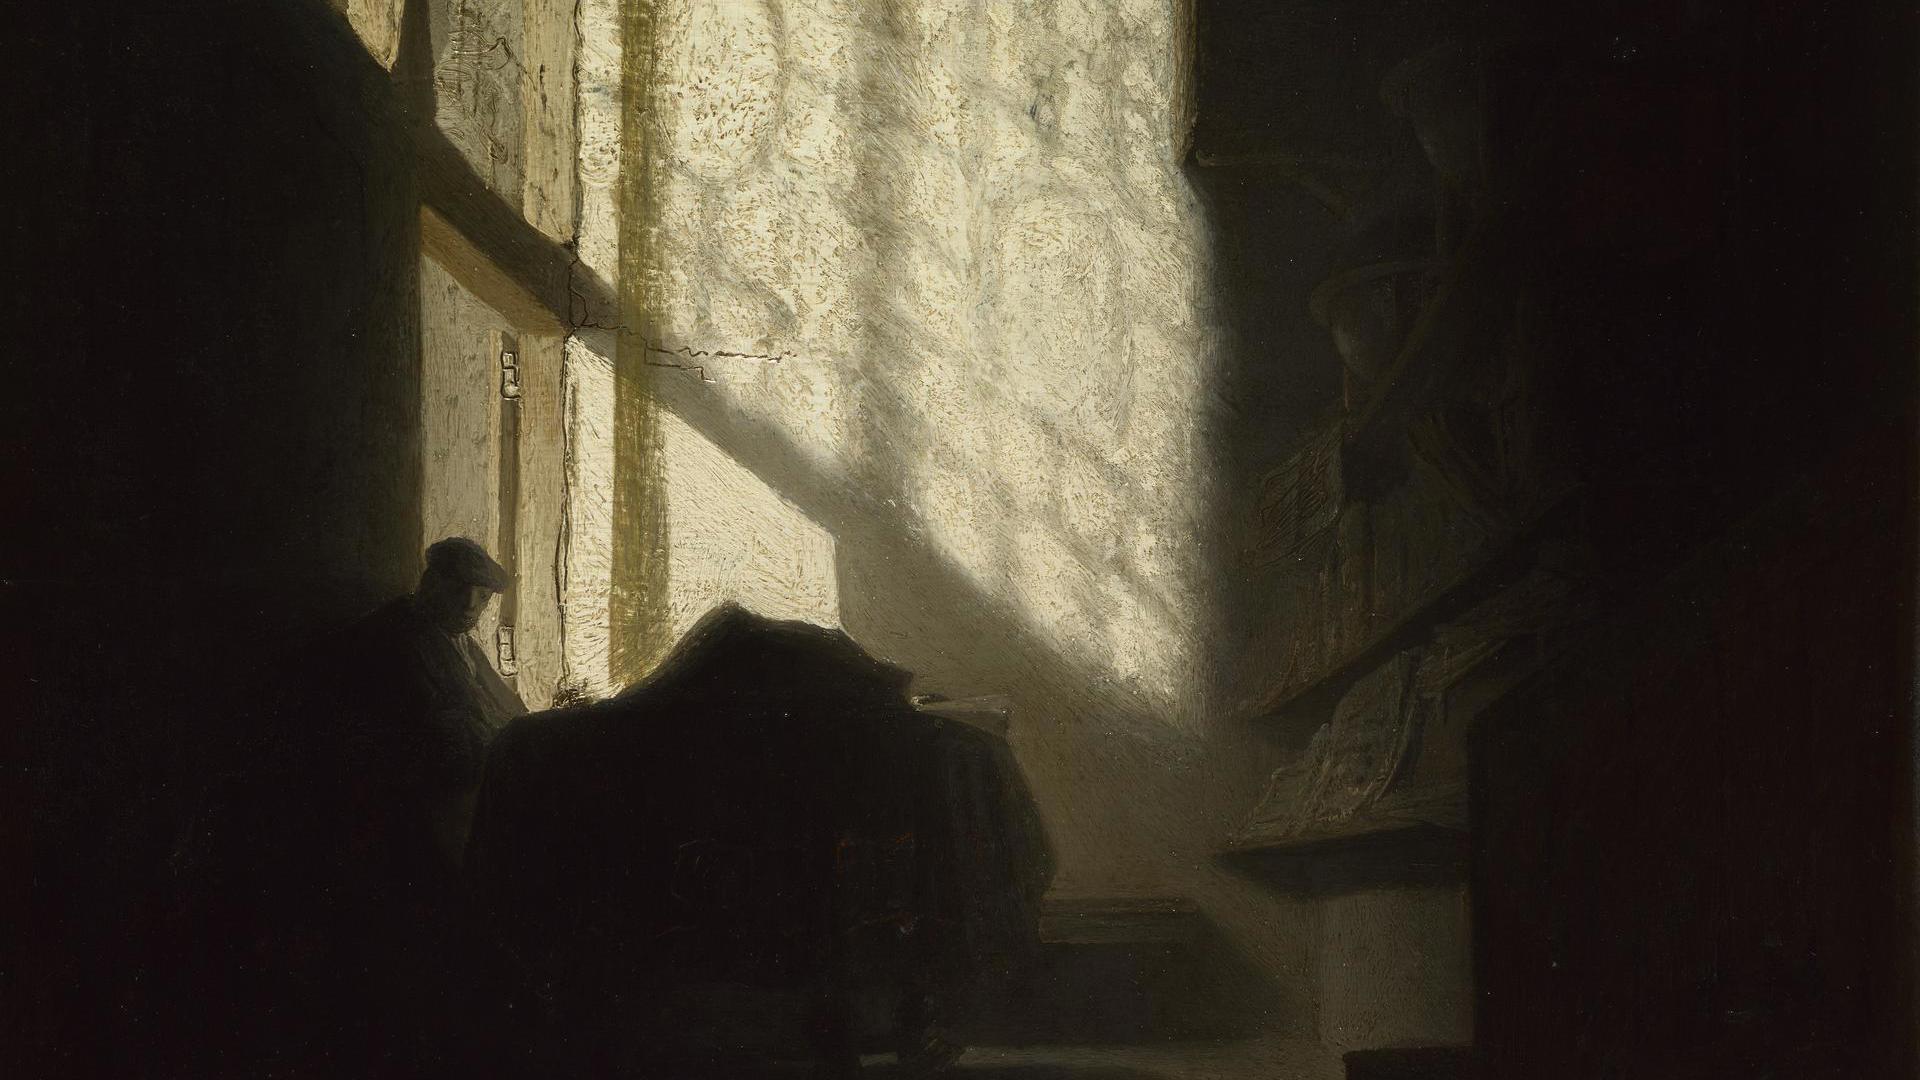 A Man seated reading at a Table in a Lofty Room by Follower of Rembrandt